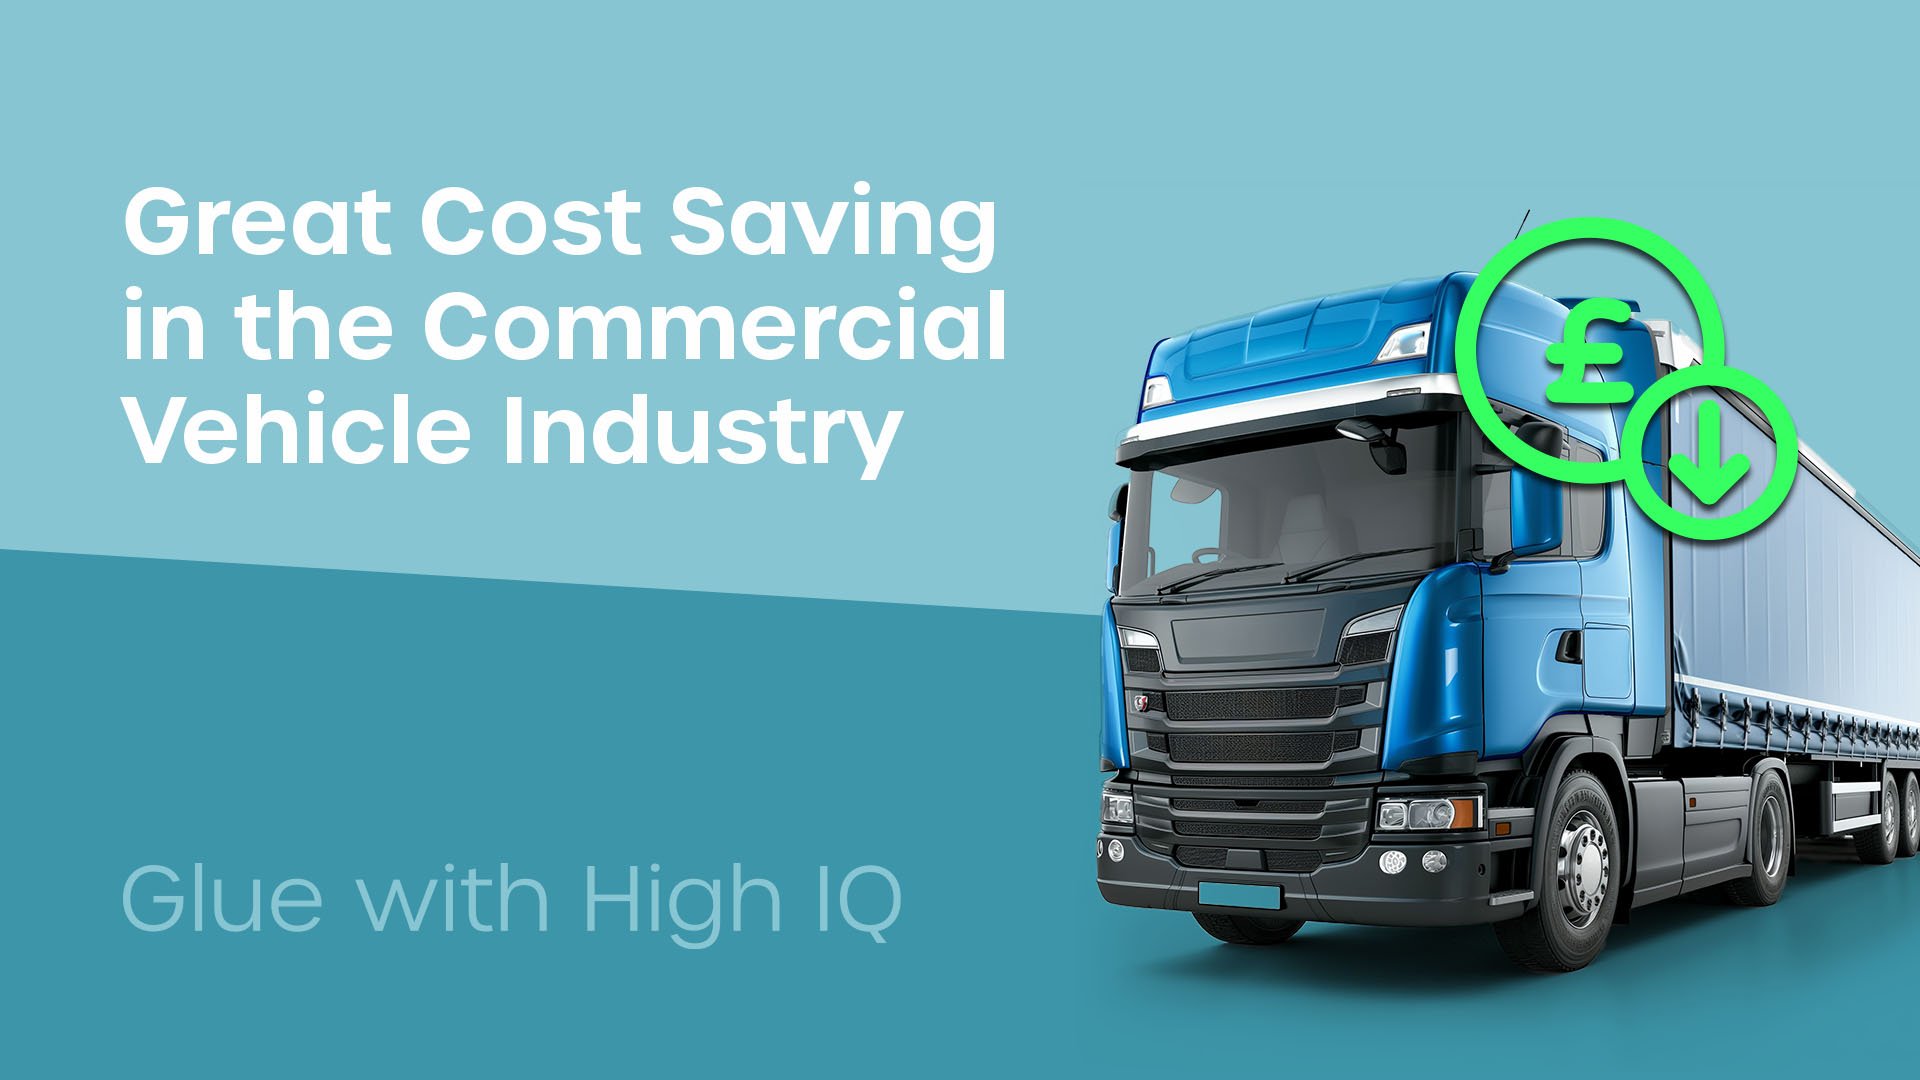 Cost saving opportunities in the commercial vehicle industry